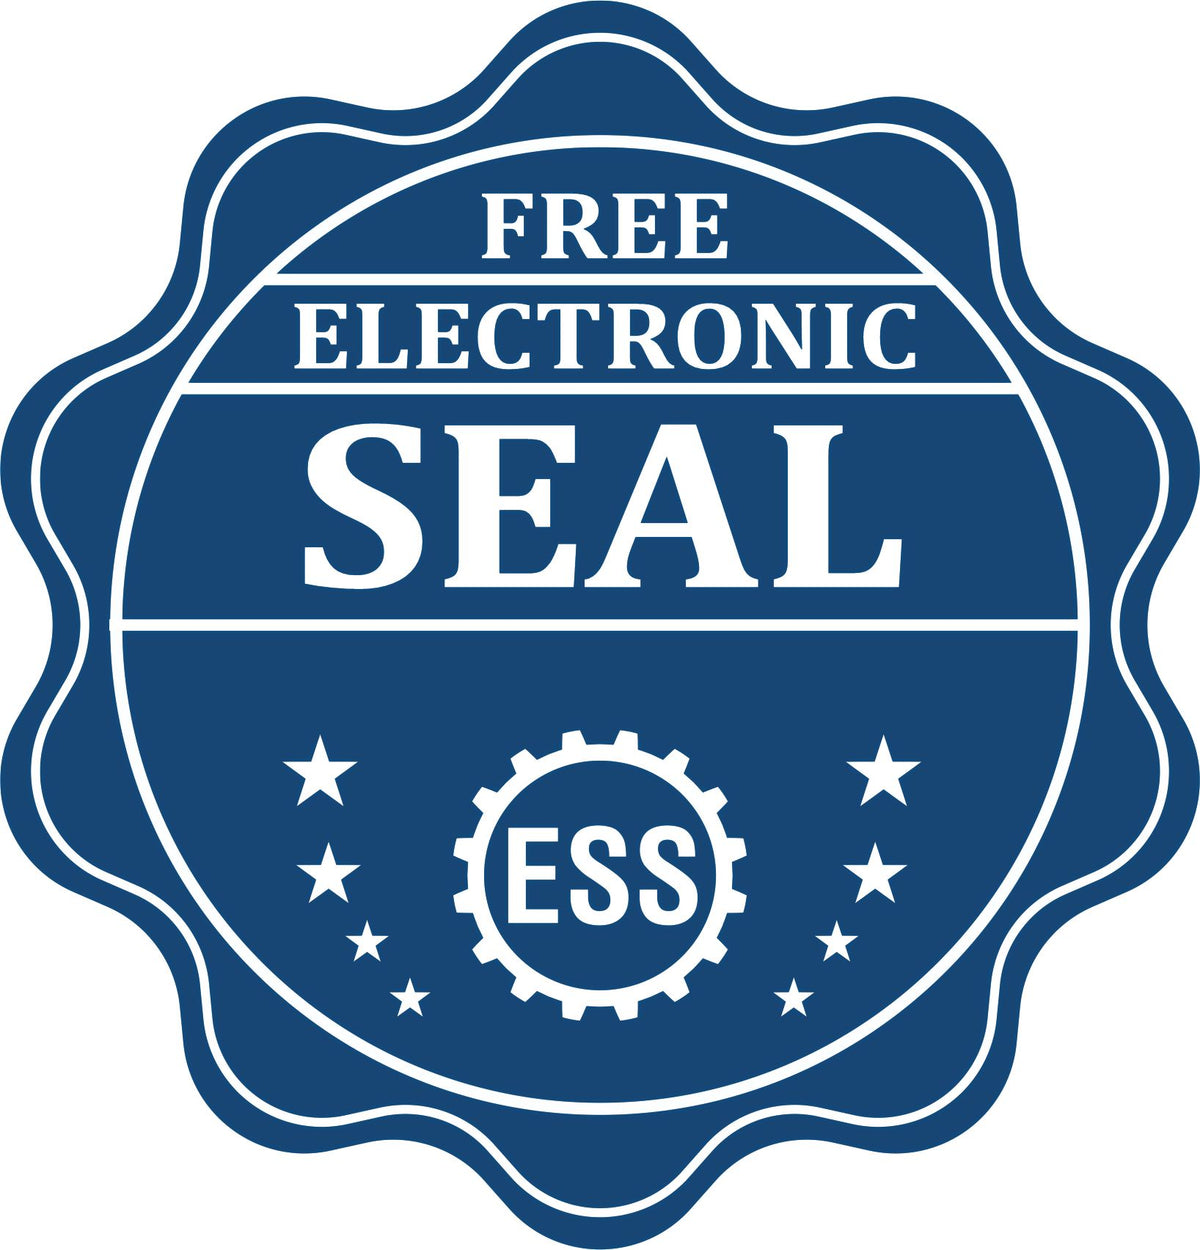 A badge showing a free electronic seal for the Slim Pre-Inked Alaska Architect Seal Stamp with stars and the ESS gear on the emblem.